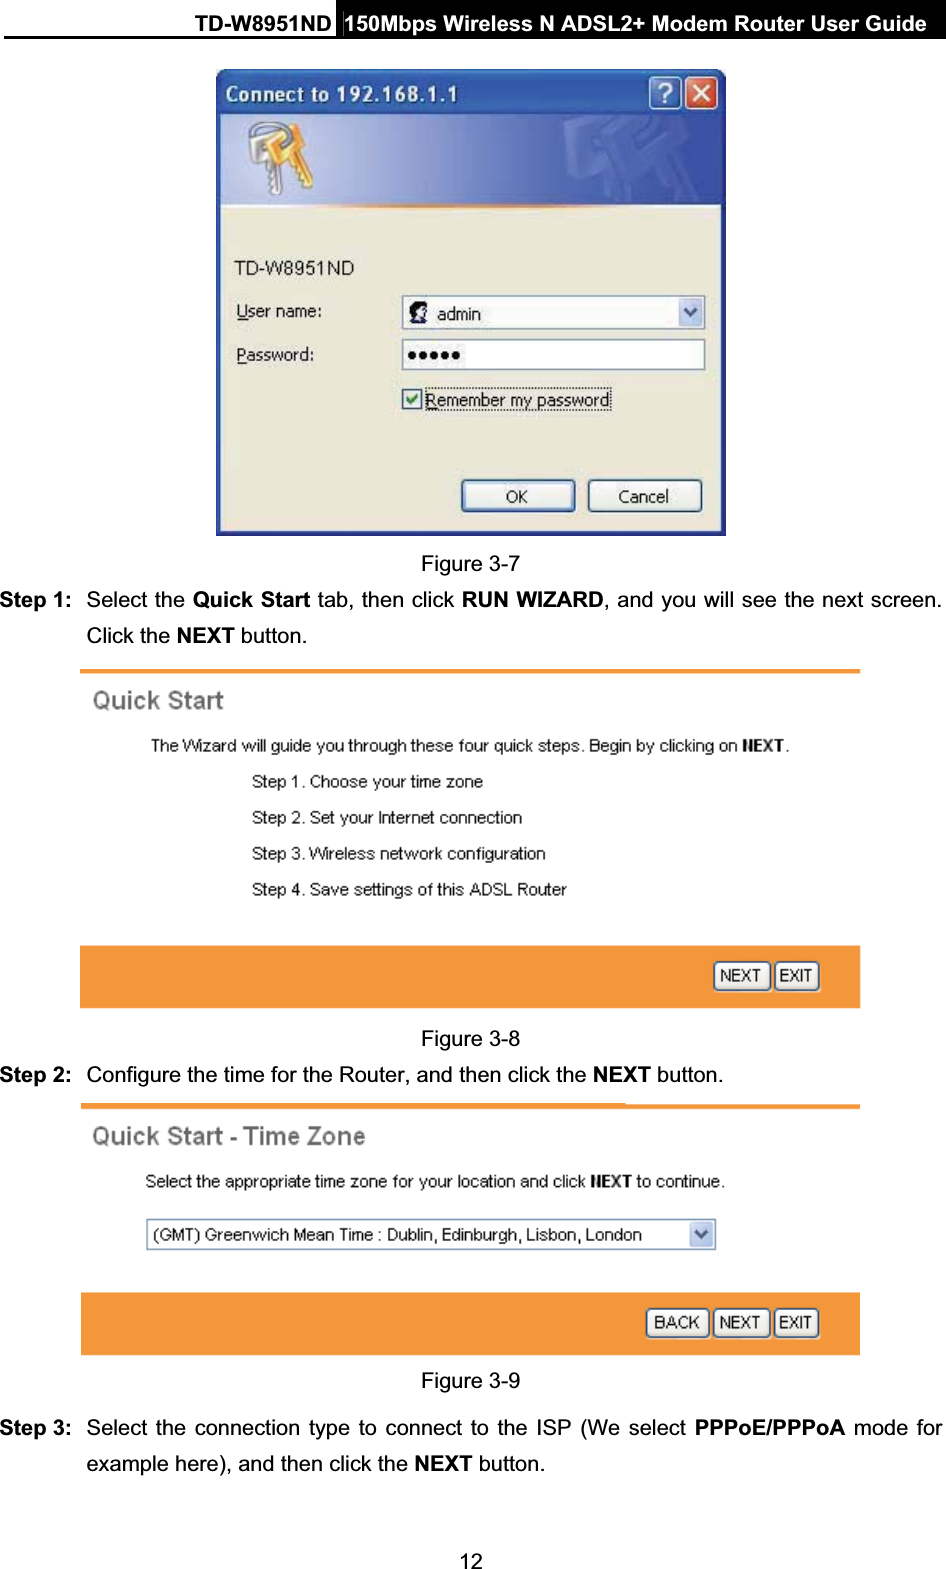 TD-W8951ND  150Mbps Wireless N ADSL2+ Modem Router User Guide12Figure 3-7 Step 1:  Select the Quick Start tab, then click RUN WIZARD, and you will see the next screen. Click the NEXT button. Figure 3-8 Step 2:  Configure the time for the Router, and then click the NEXT button. Figure 3-9 Step 3:  Select the connection type to connect to the ISP (We select PPPoE/PPPoA mode for example here), and then click the NEXT button. 